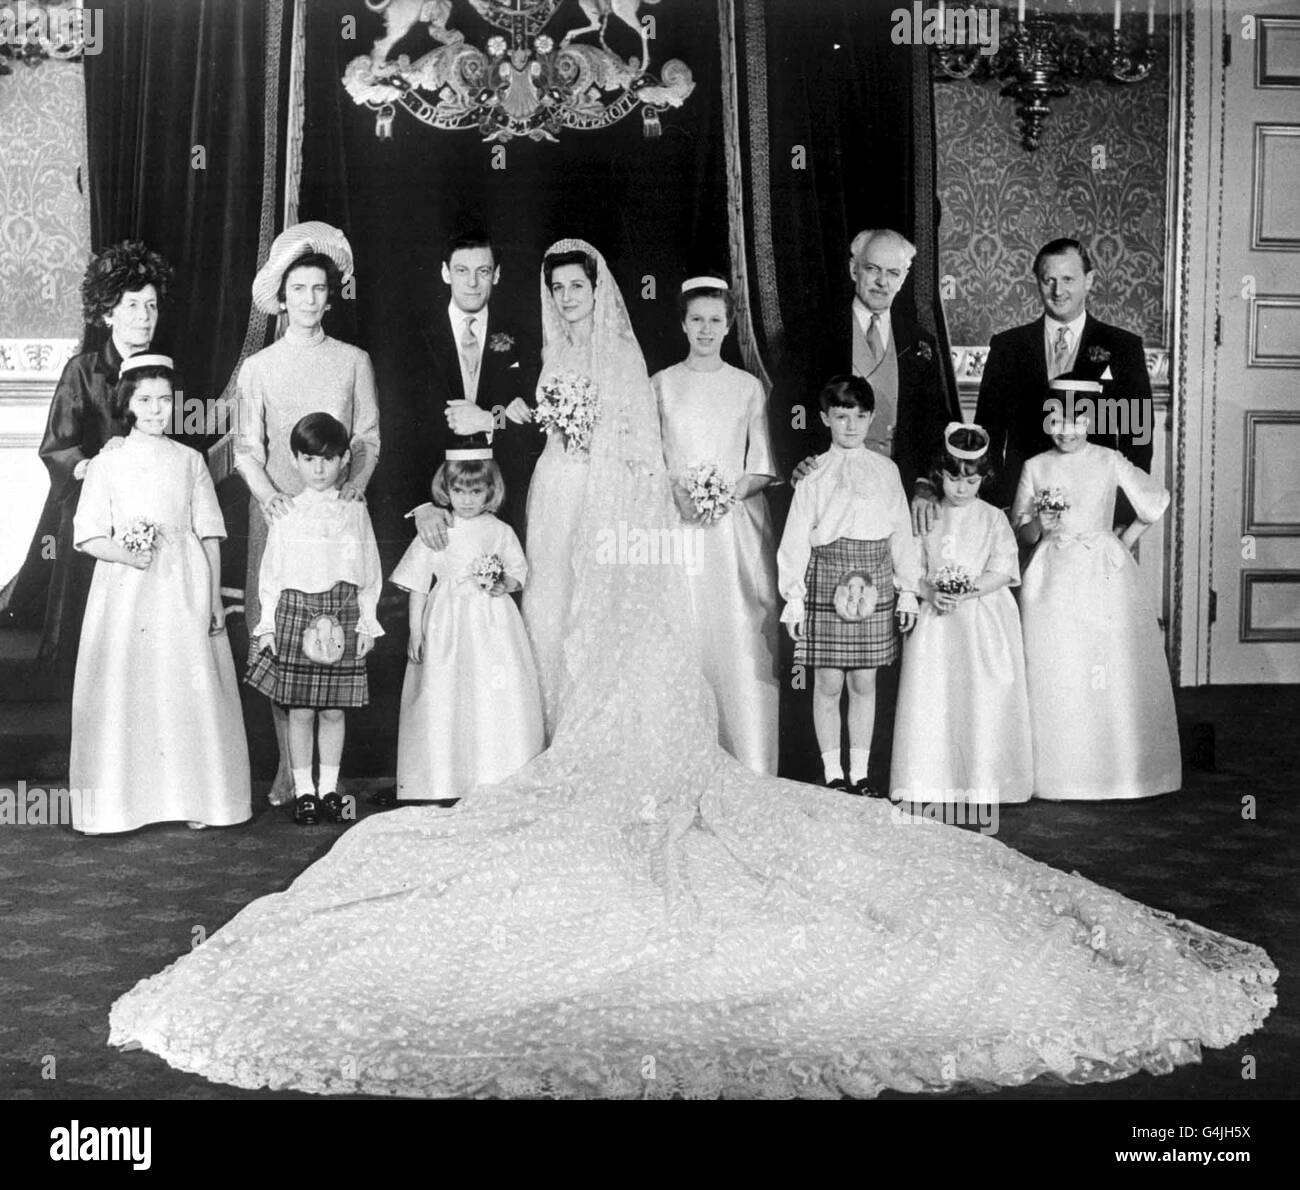 Princess Alexandra and her bridegroom Angus Ogilvy pose with members of their family during the reception at St. James's Palace in London after their wedding ceremony at Westminster Abbey. Stock Photo